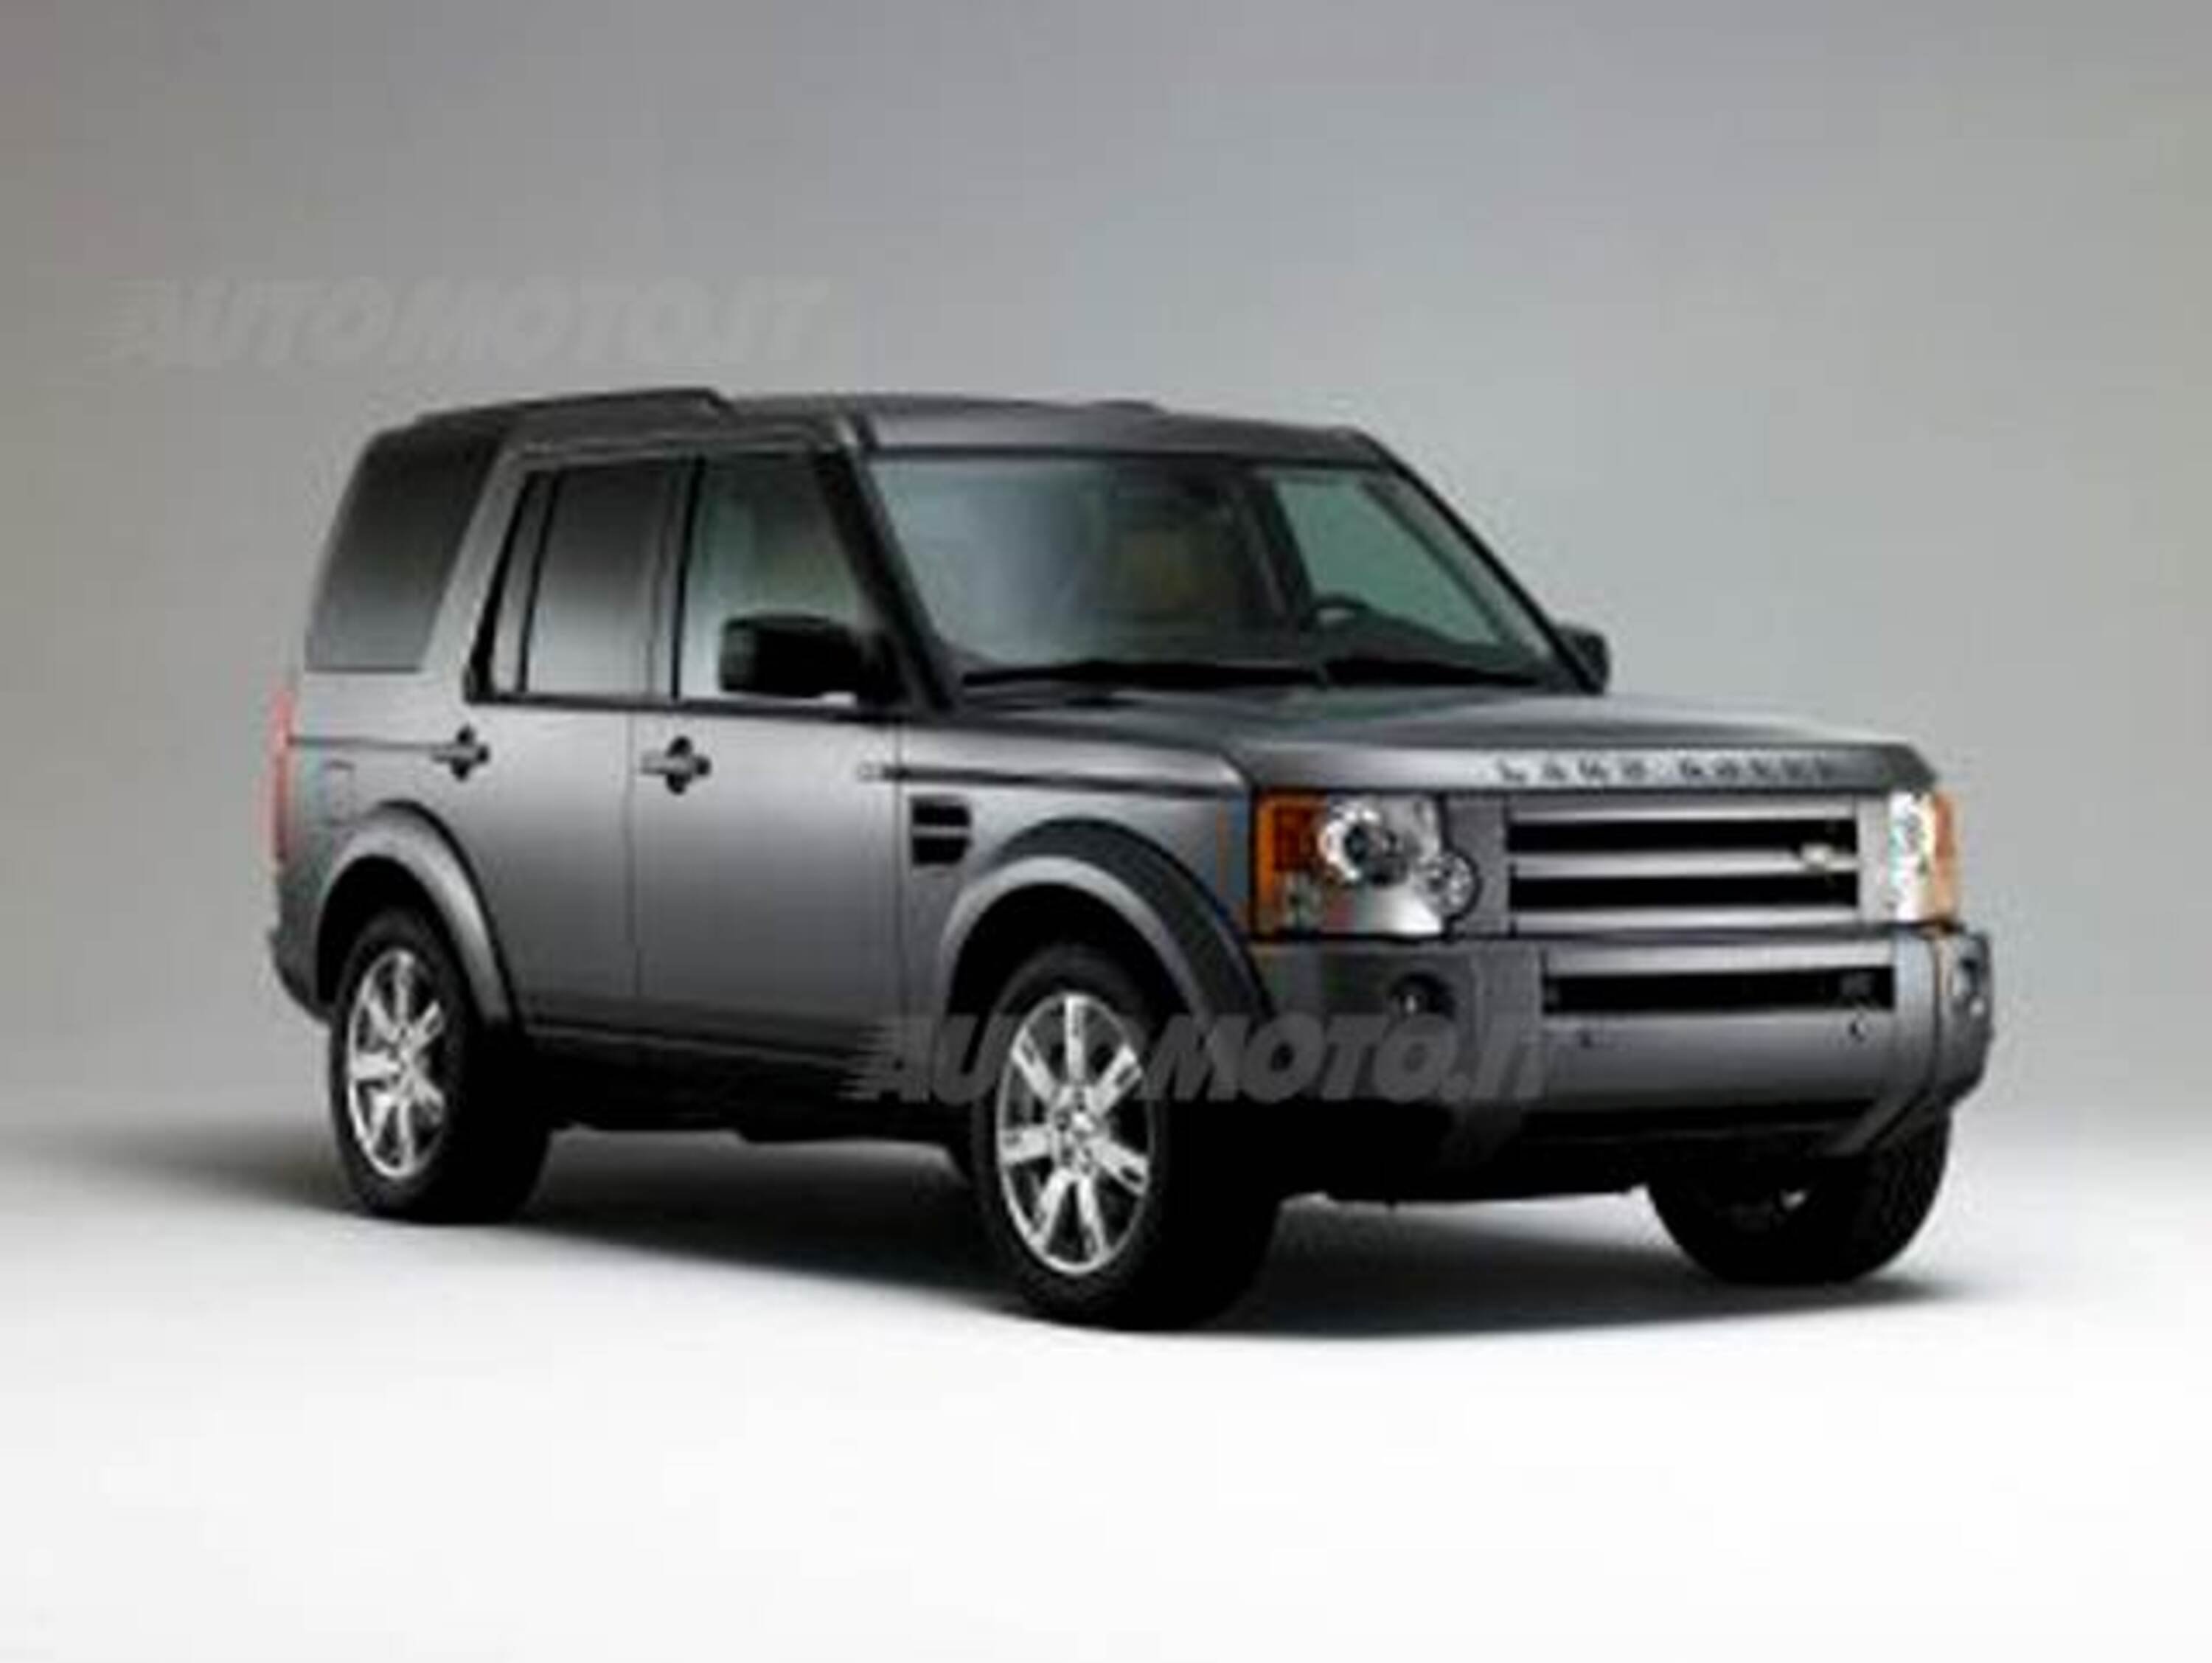 Land Rover Discovery 3 2.7 TDV6 SE my 08